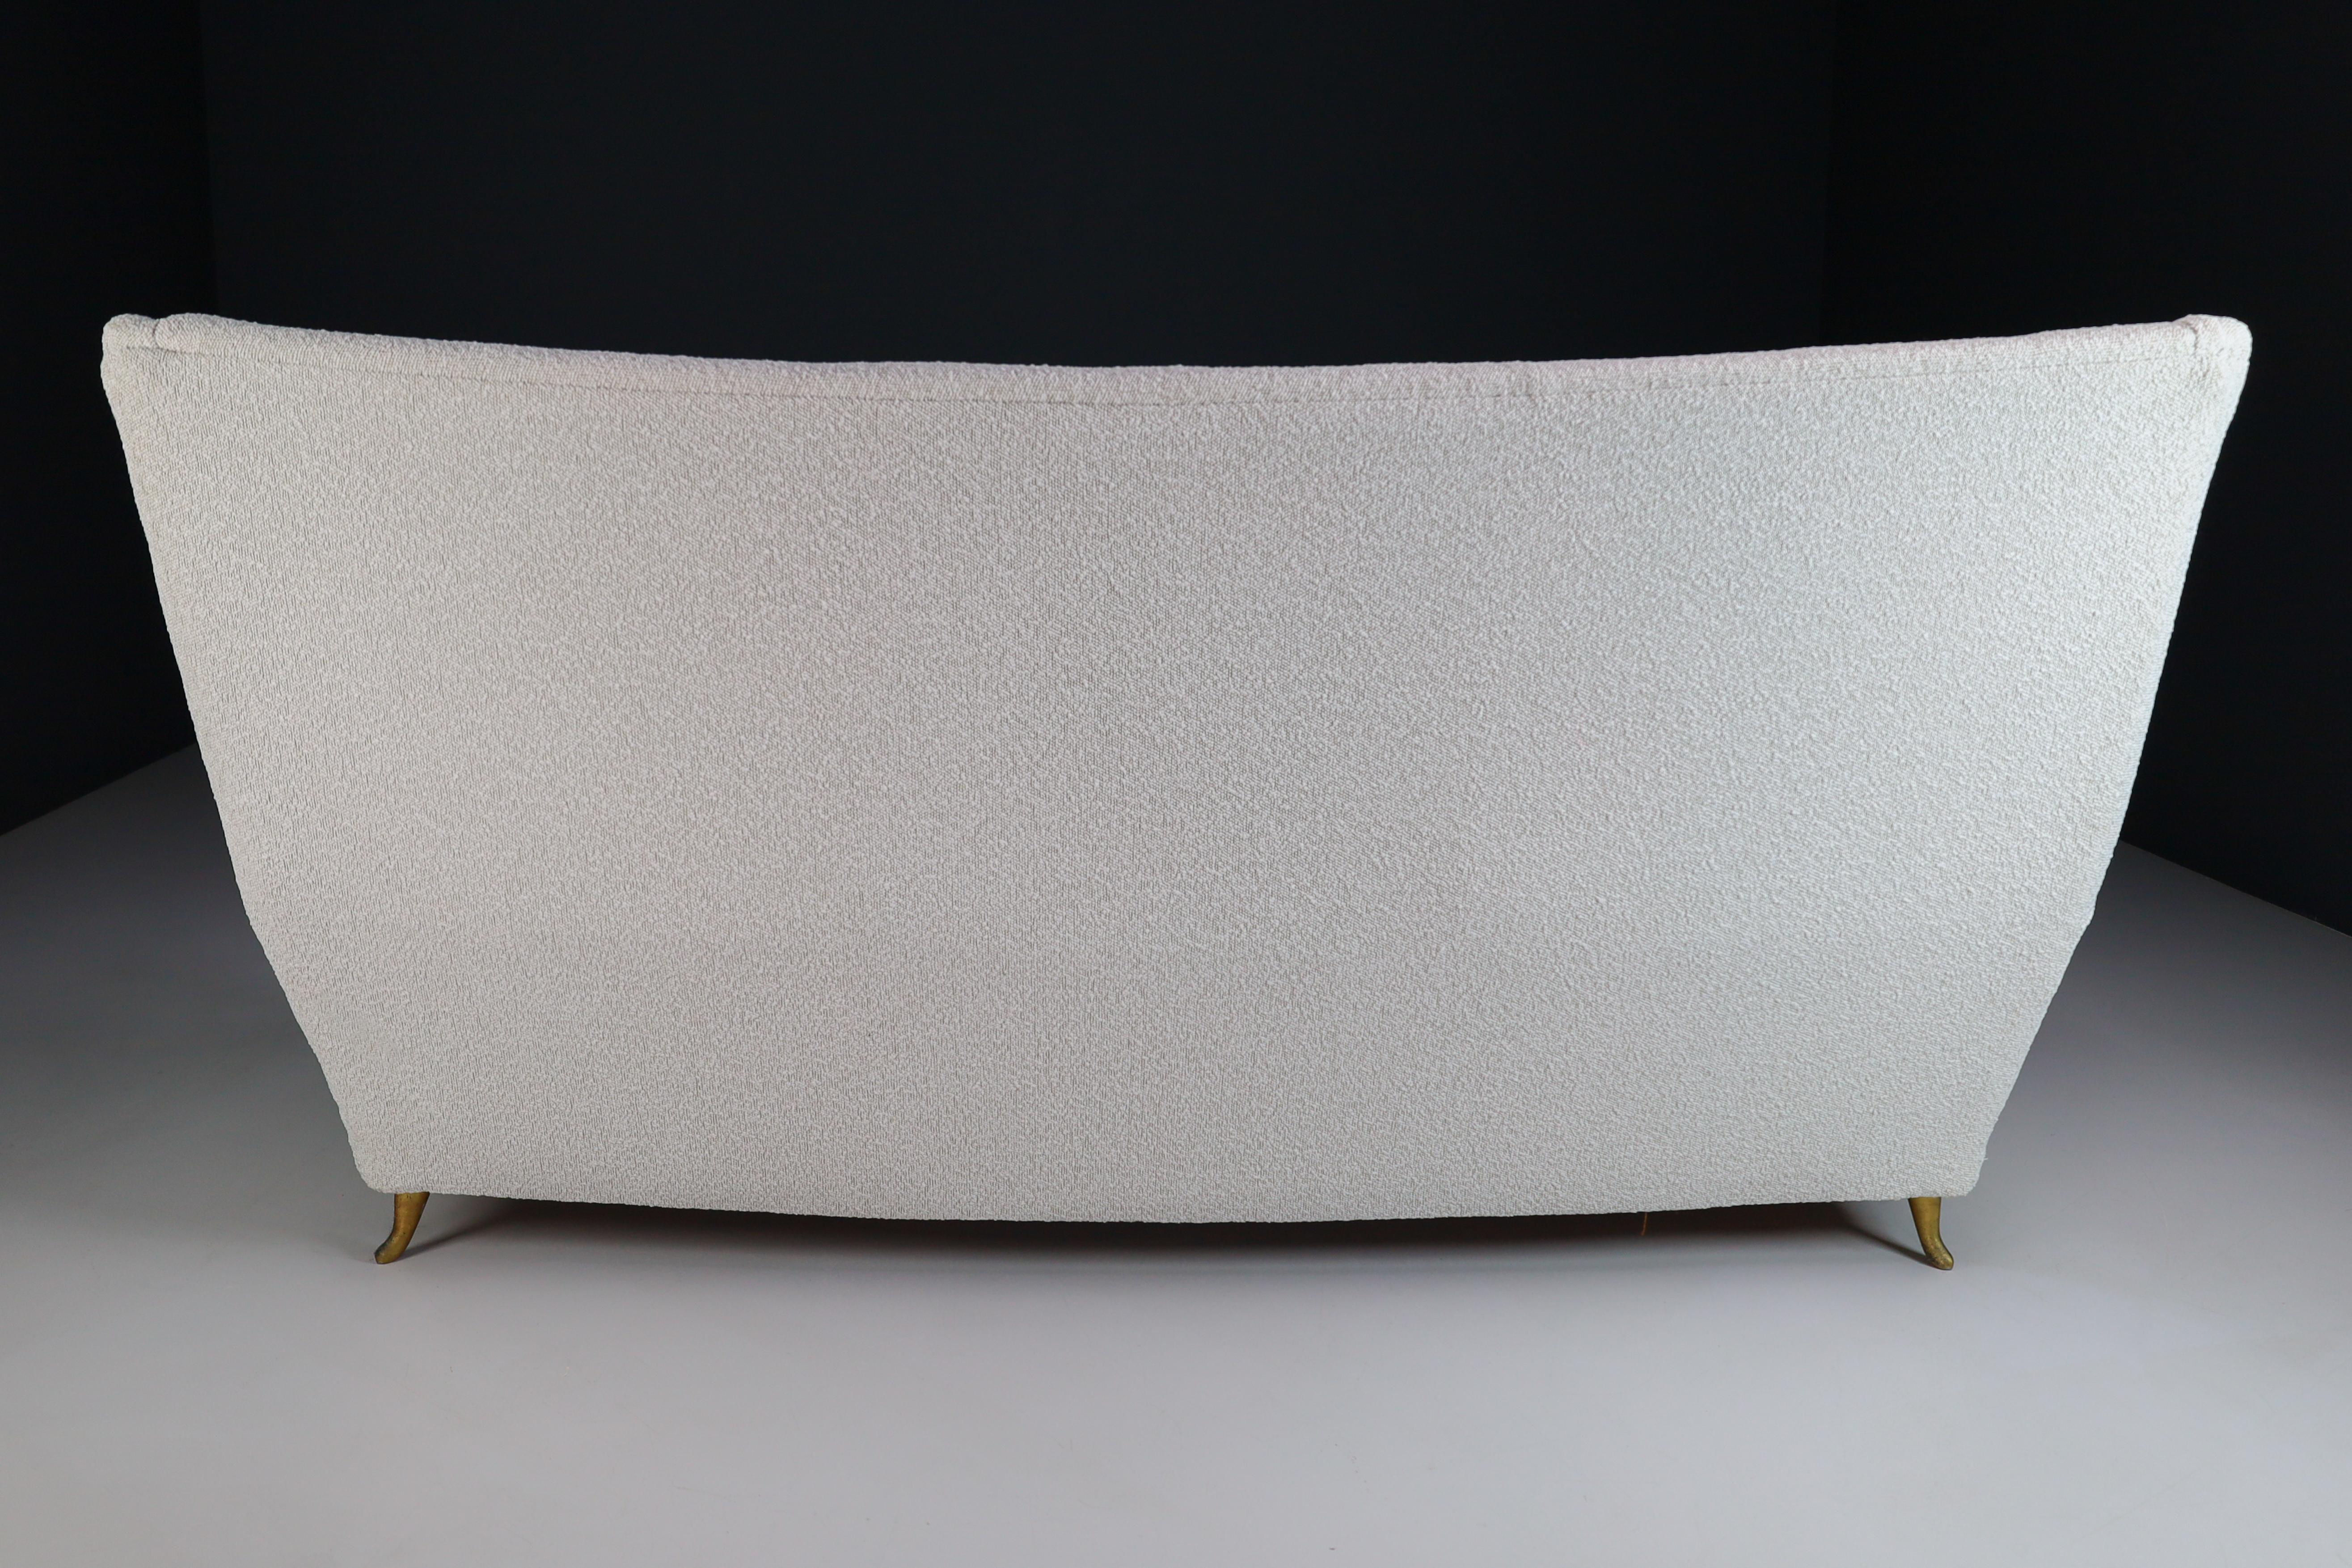 High Back Sofa By Gio Ponti For ISA Bergamo in Bouclé Fabric Upholstery 1950s For Sale 2